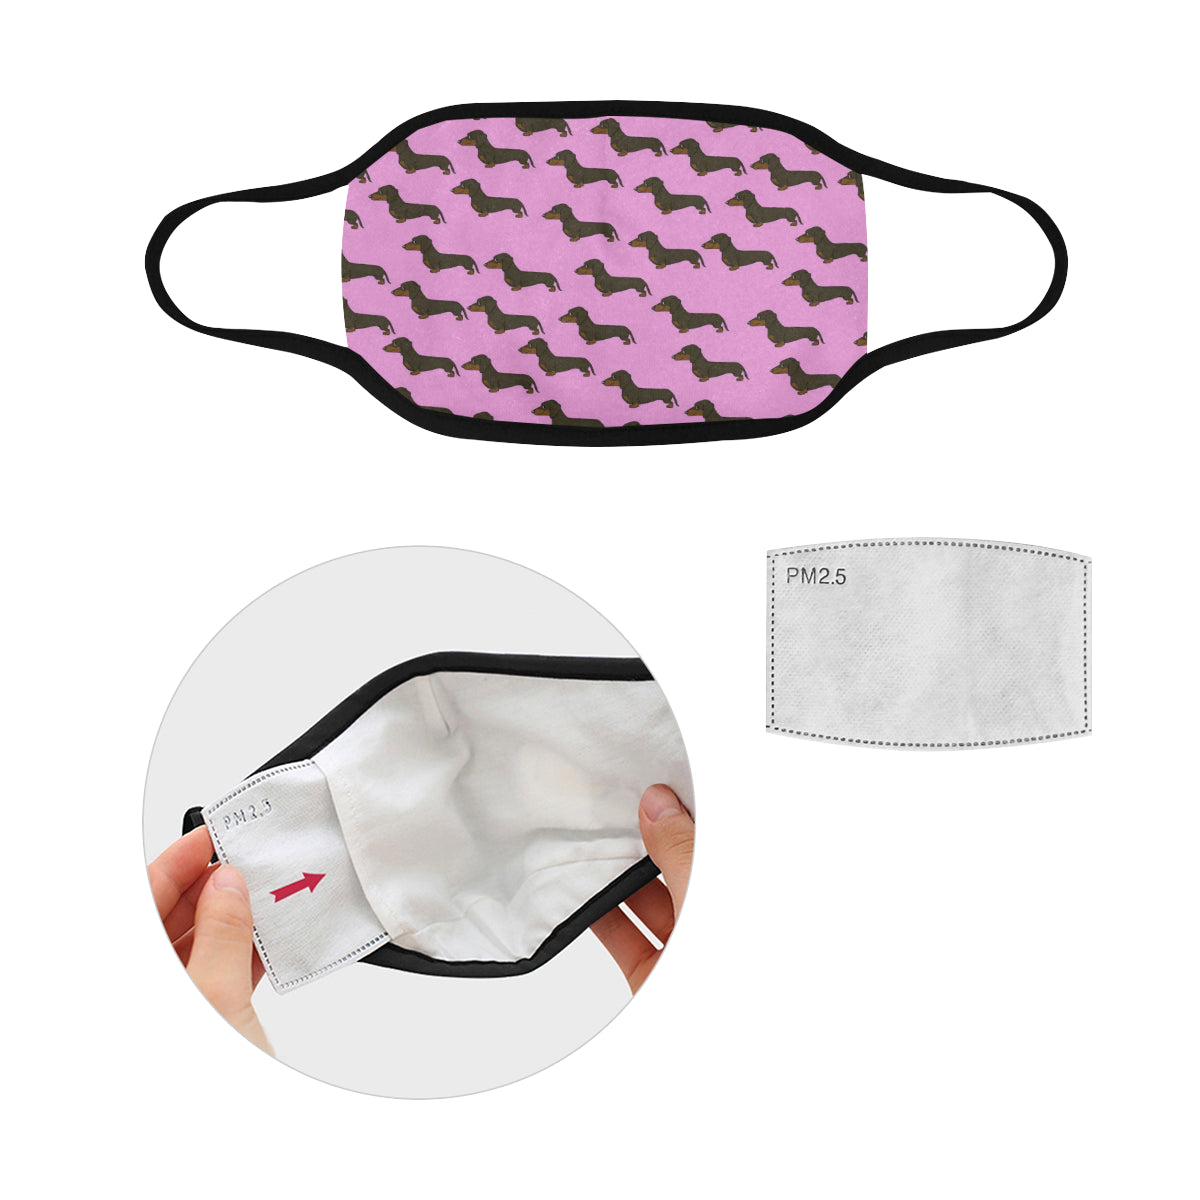 Dachshund Cloth Face Cover - Pink includes filter